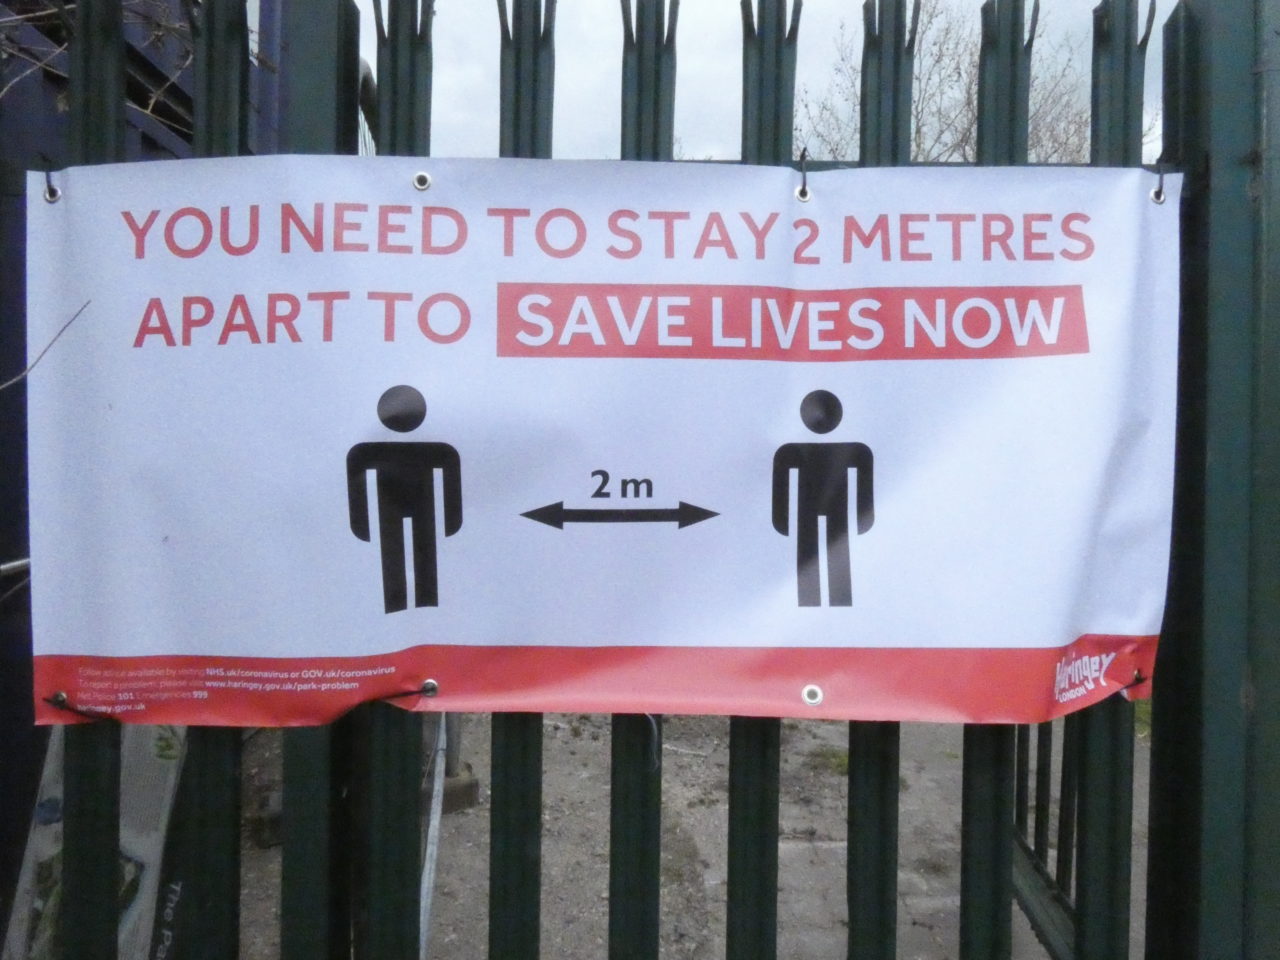 banner tied to metal fence saying You need to stay 2 metres apart to save lives now